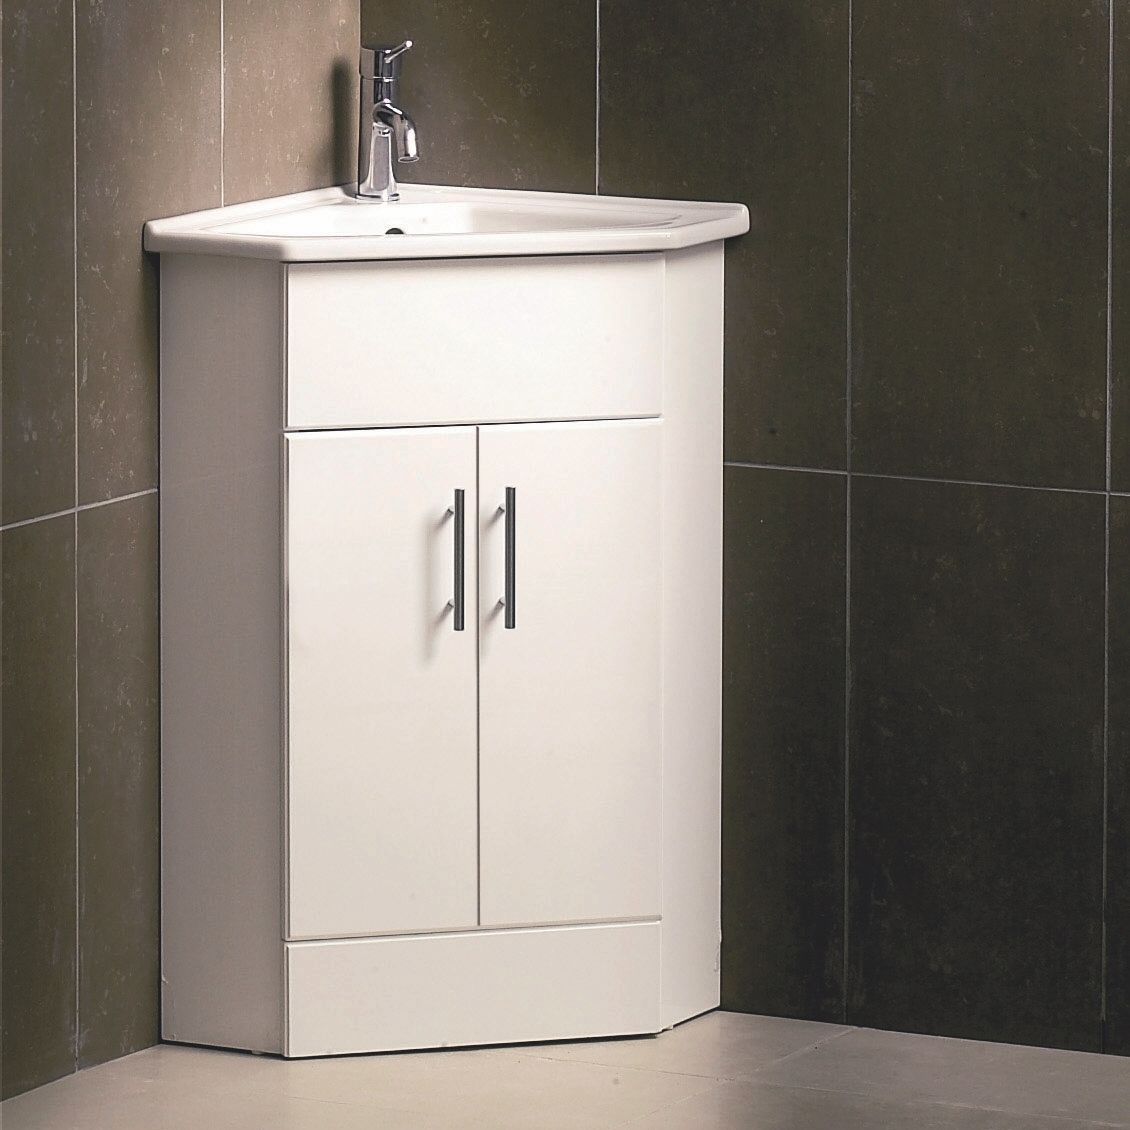 White Compact Corner Vanity Unit Bathroom Furniture Sink Cabinet throughout proportions 1130 X 1130